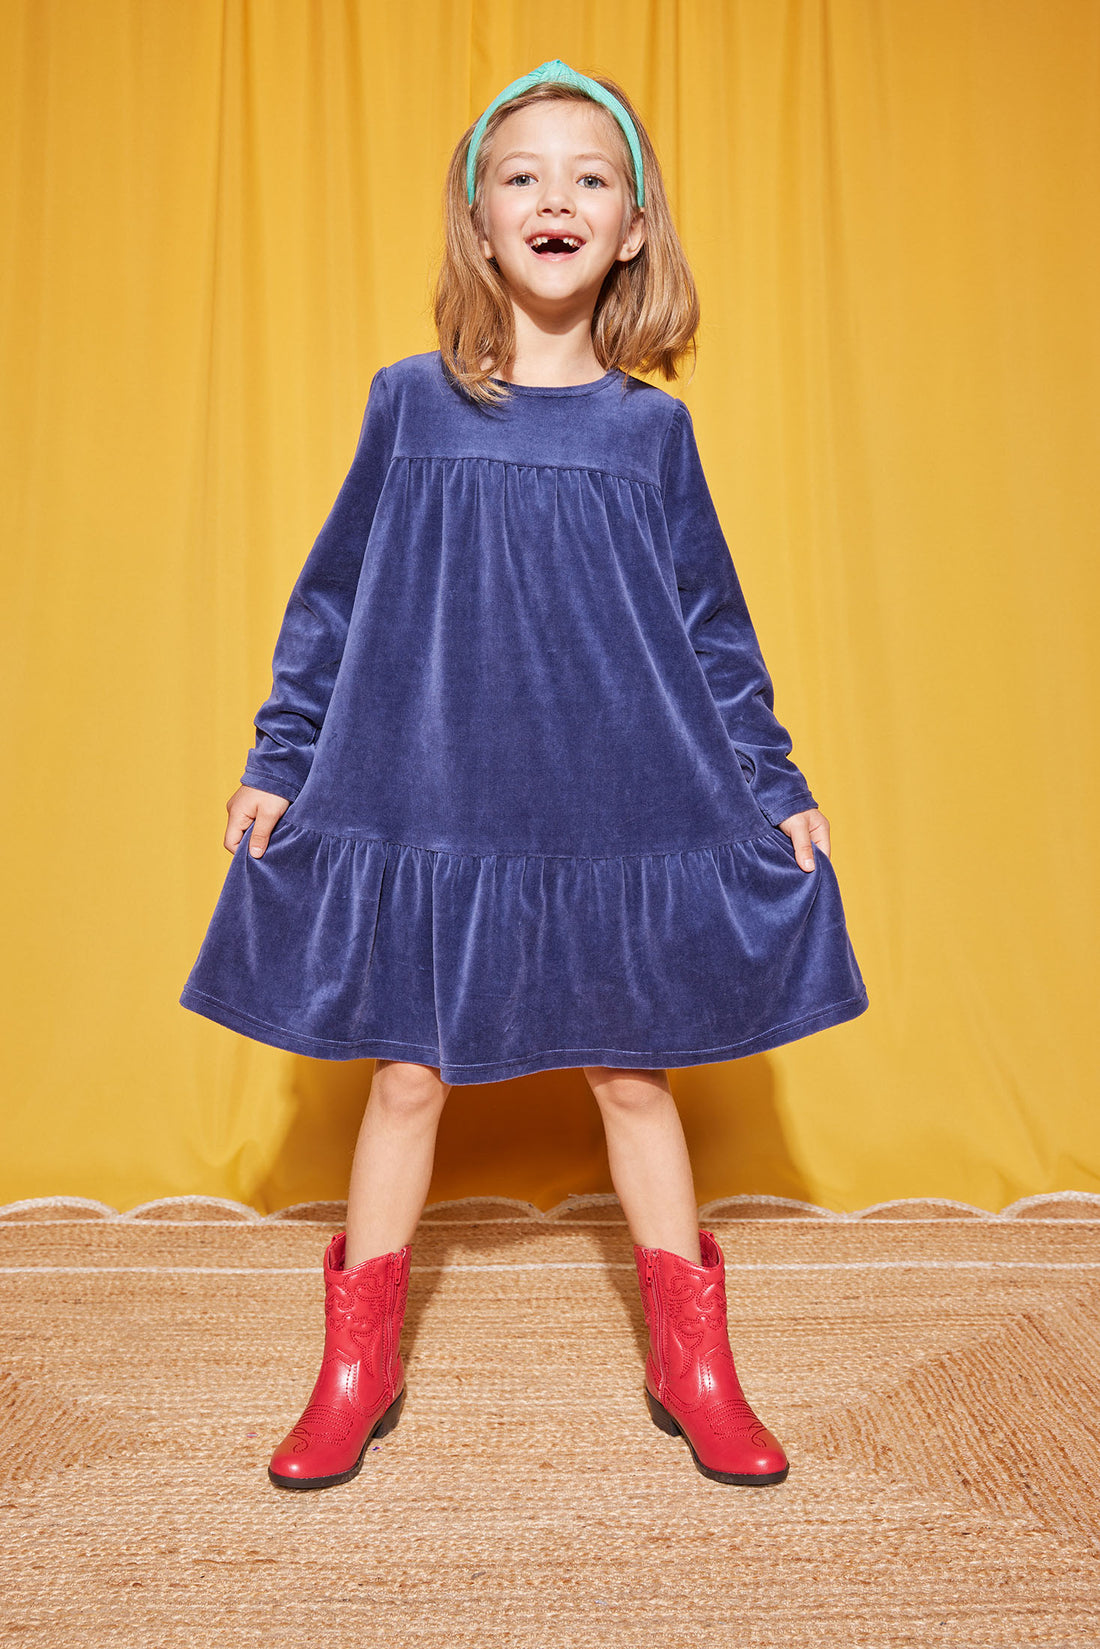 Our model can be seen wearing our Lisle Dress in our Navy Velour color--BISBY girl